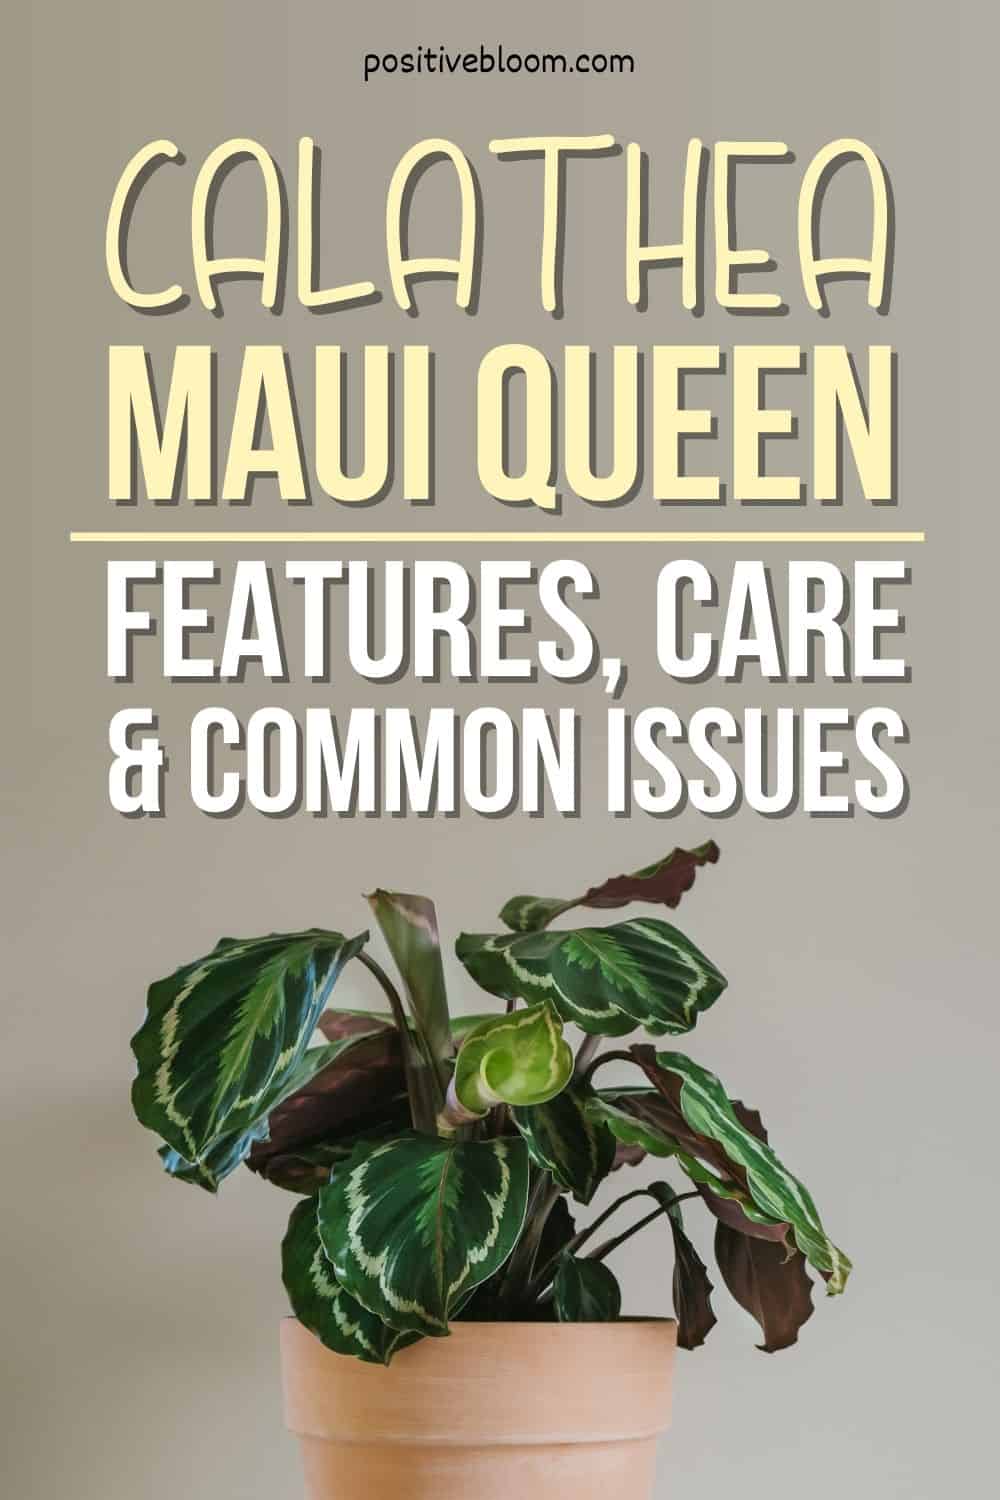 Calathea Maui Queen Features, Care & Common Issues Pinterest